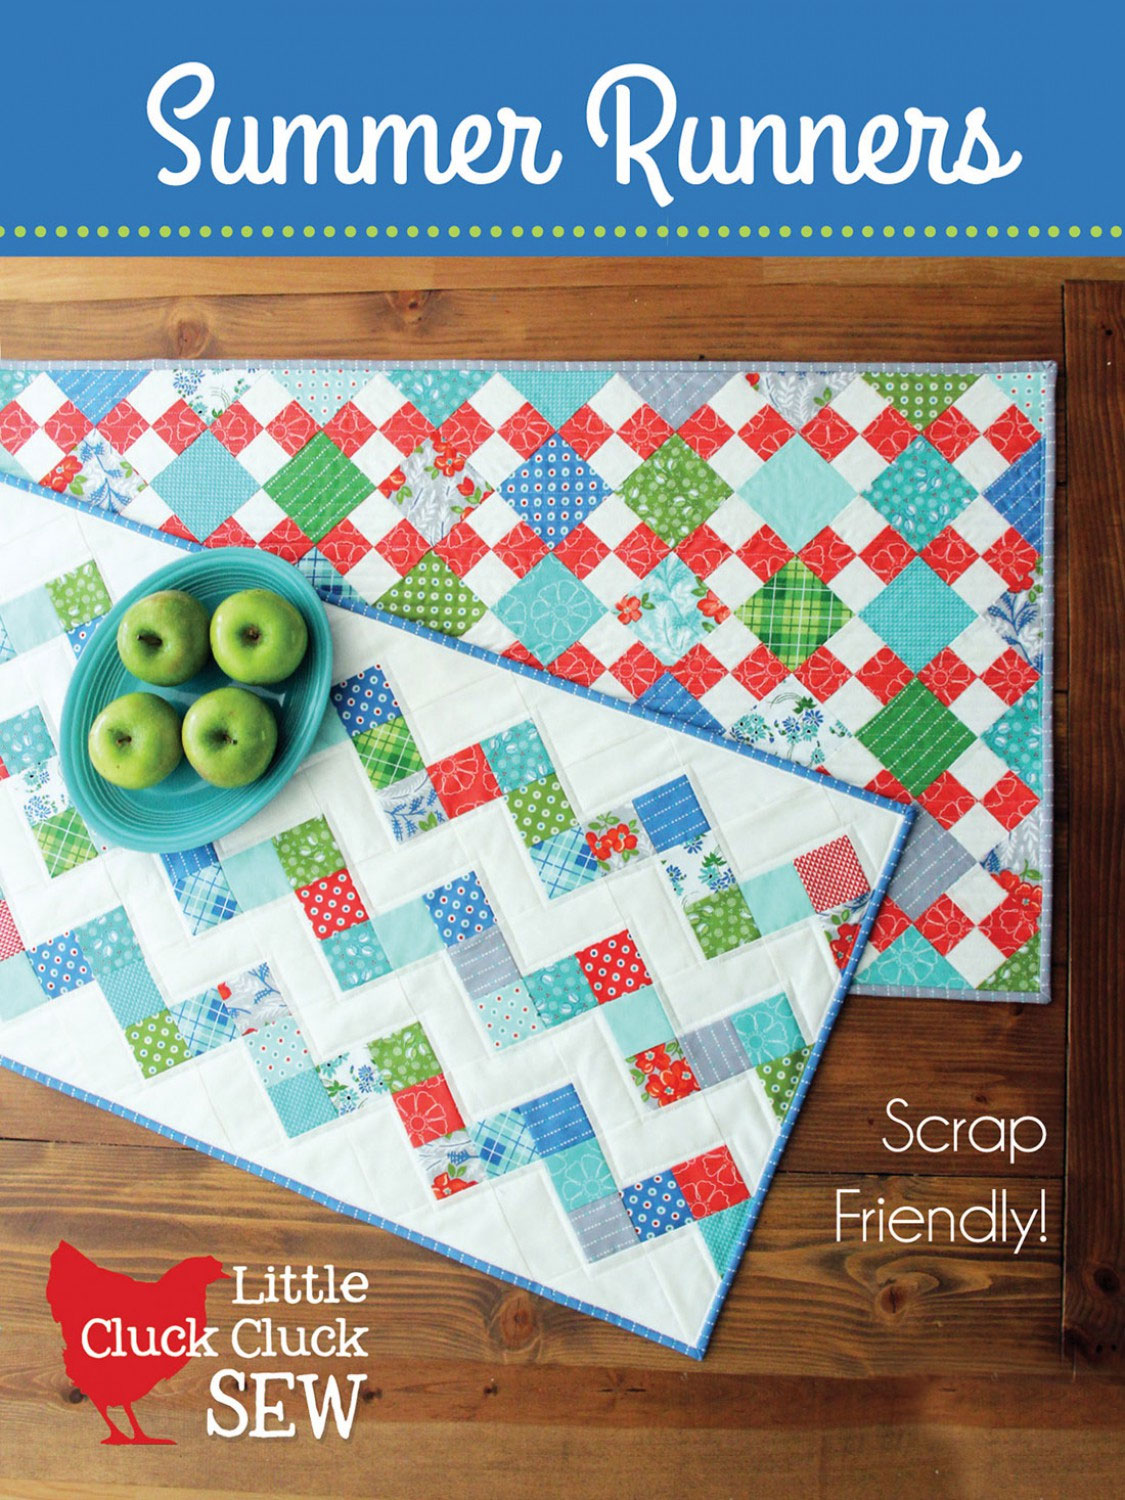 Summer-Runners-quilt-sewing-pattern-Cluck-Cluck-Sew-front